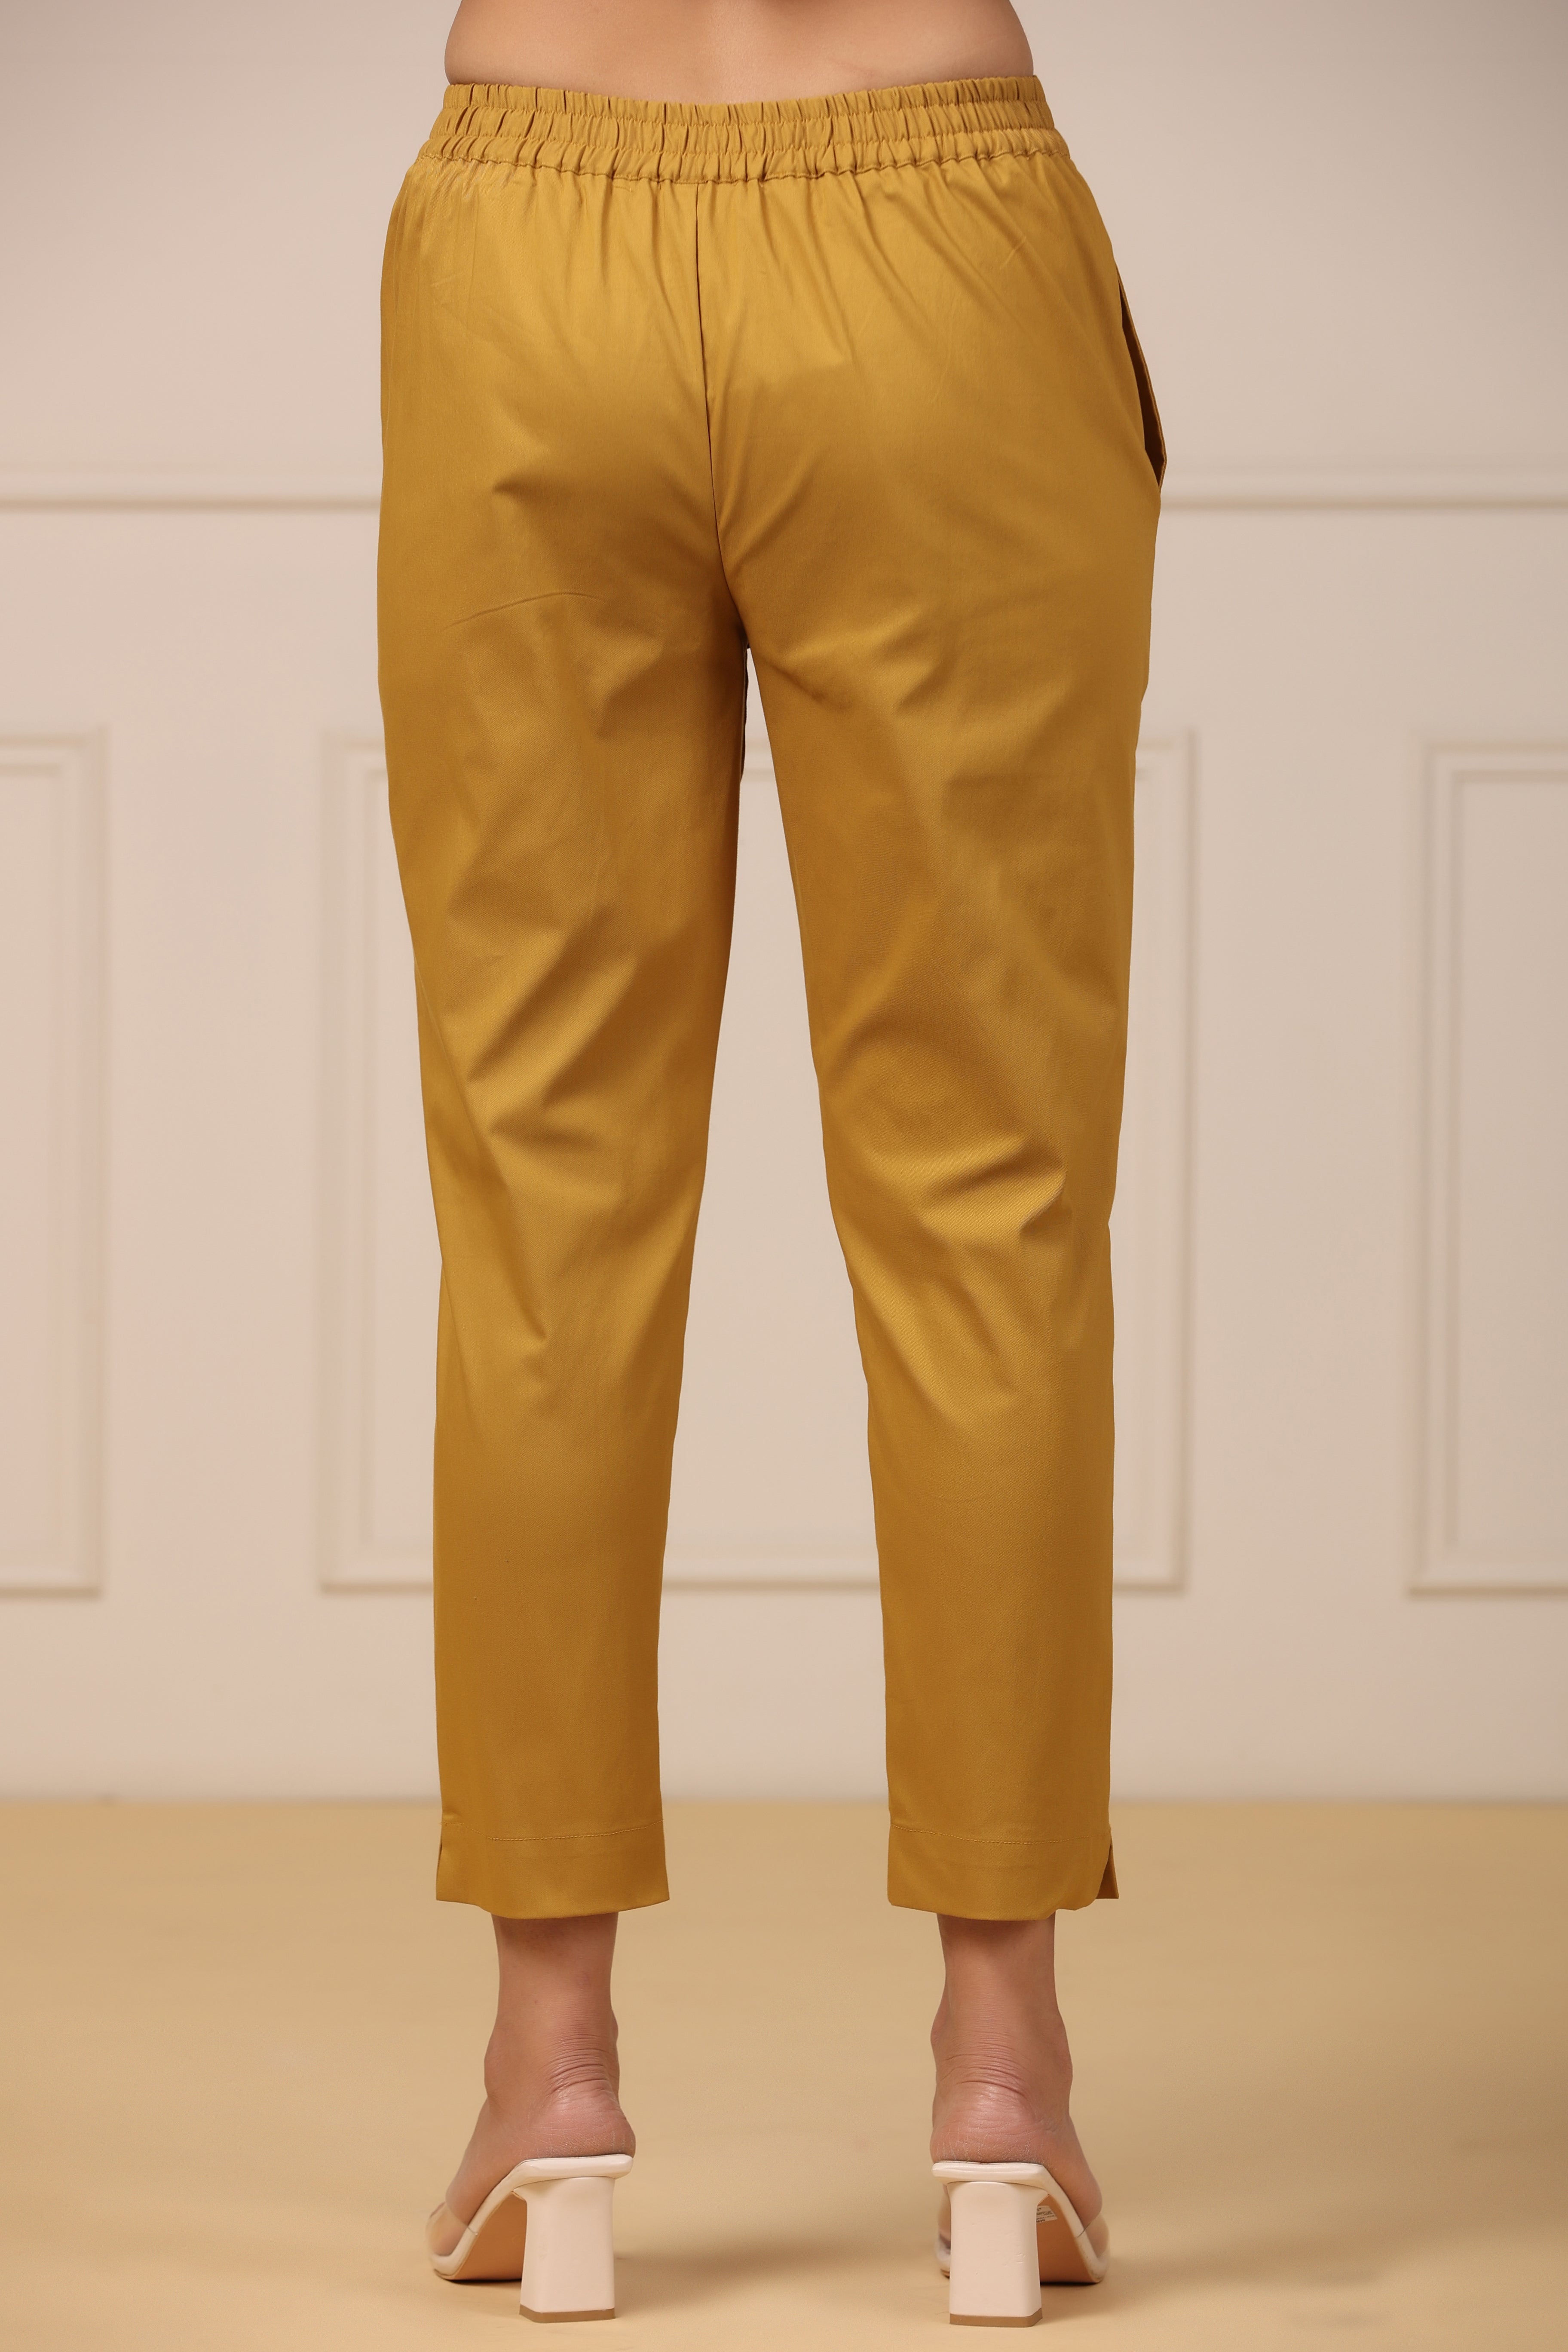 Green And Yellow Golden Zari Embroidered Pant Style Suit | Fashion pants,  Embroidered pants, Clothes collection